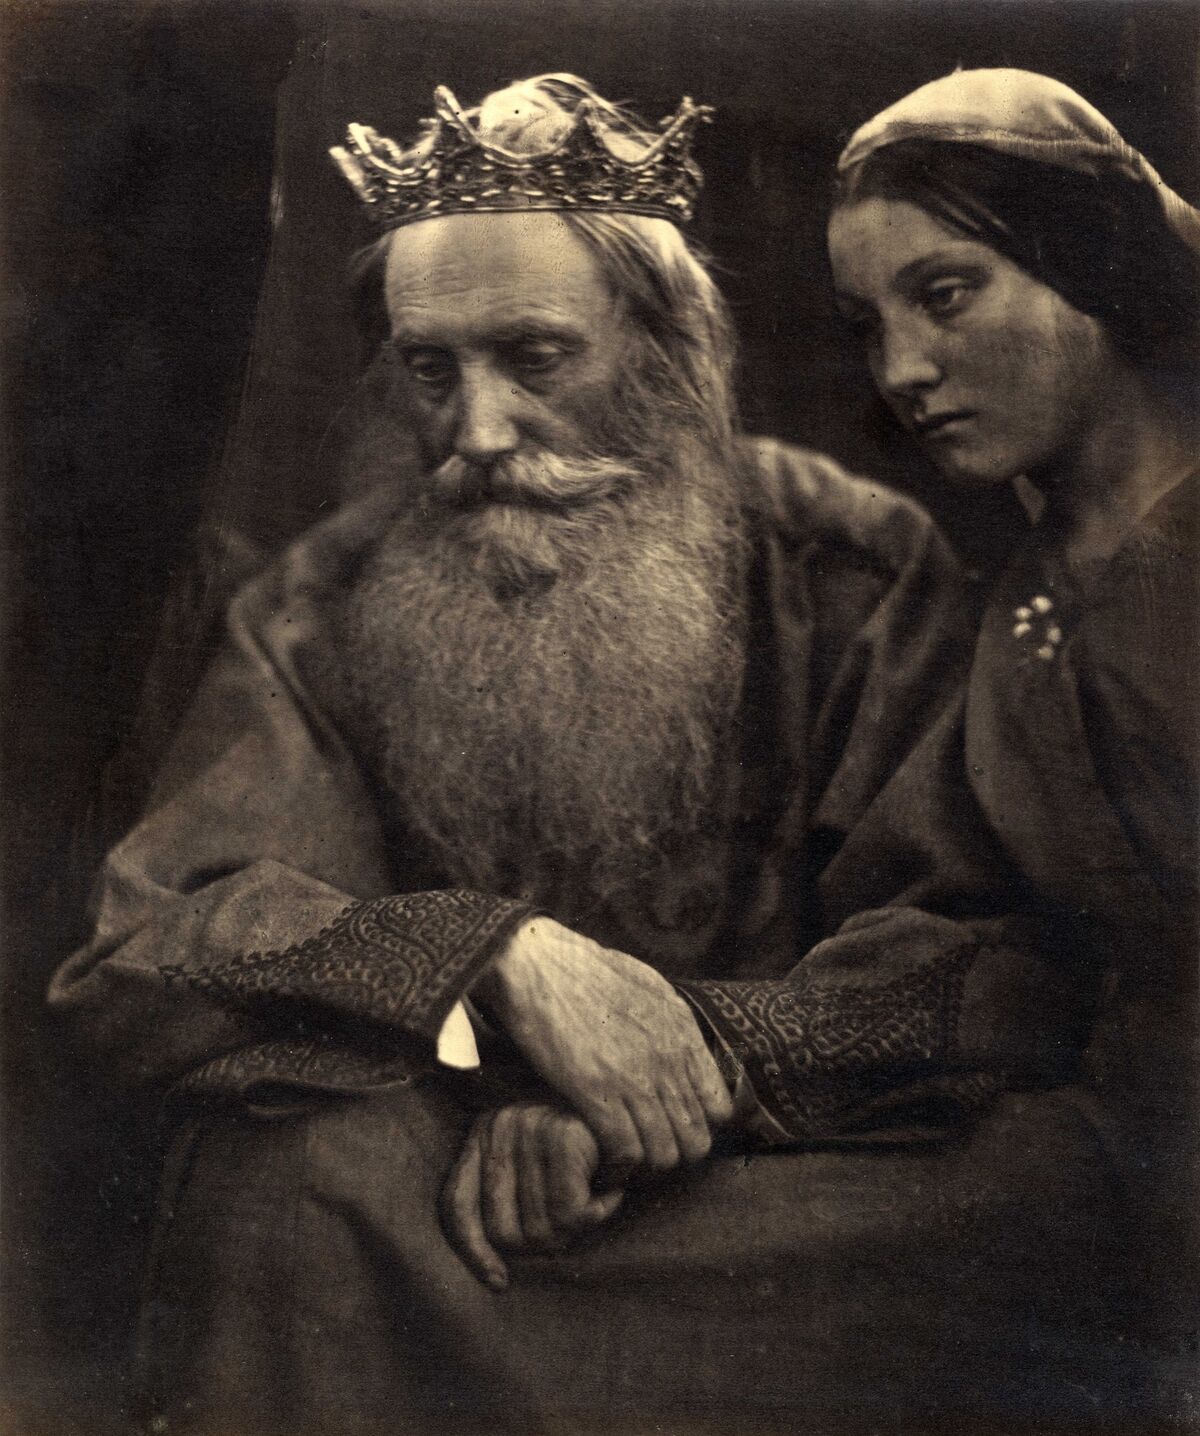 Julia Margaret Cameron. King David and Bathsheba (Henry Taylor and Mary Hillier), 1869. Courtesy of The Barnes Foundation, Michael Mattis and Judy Hochberg.